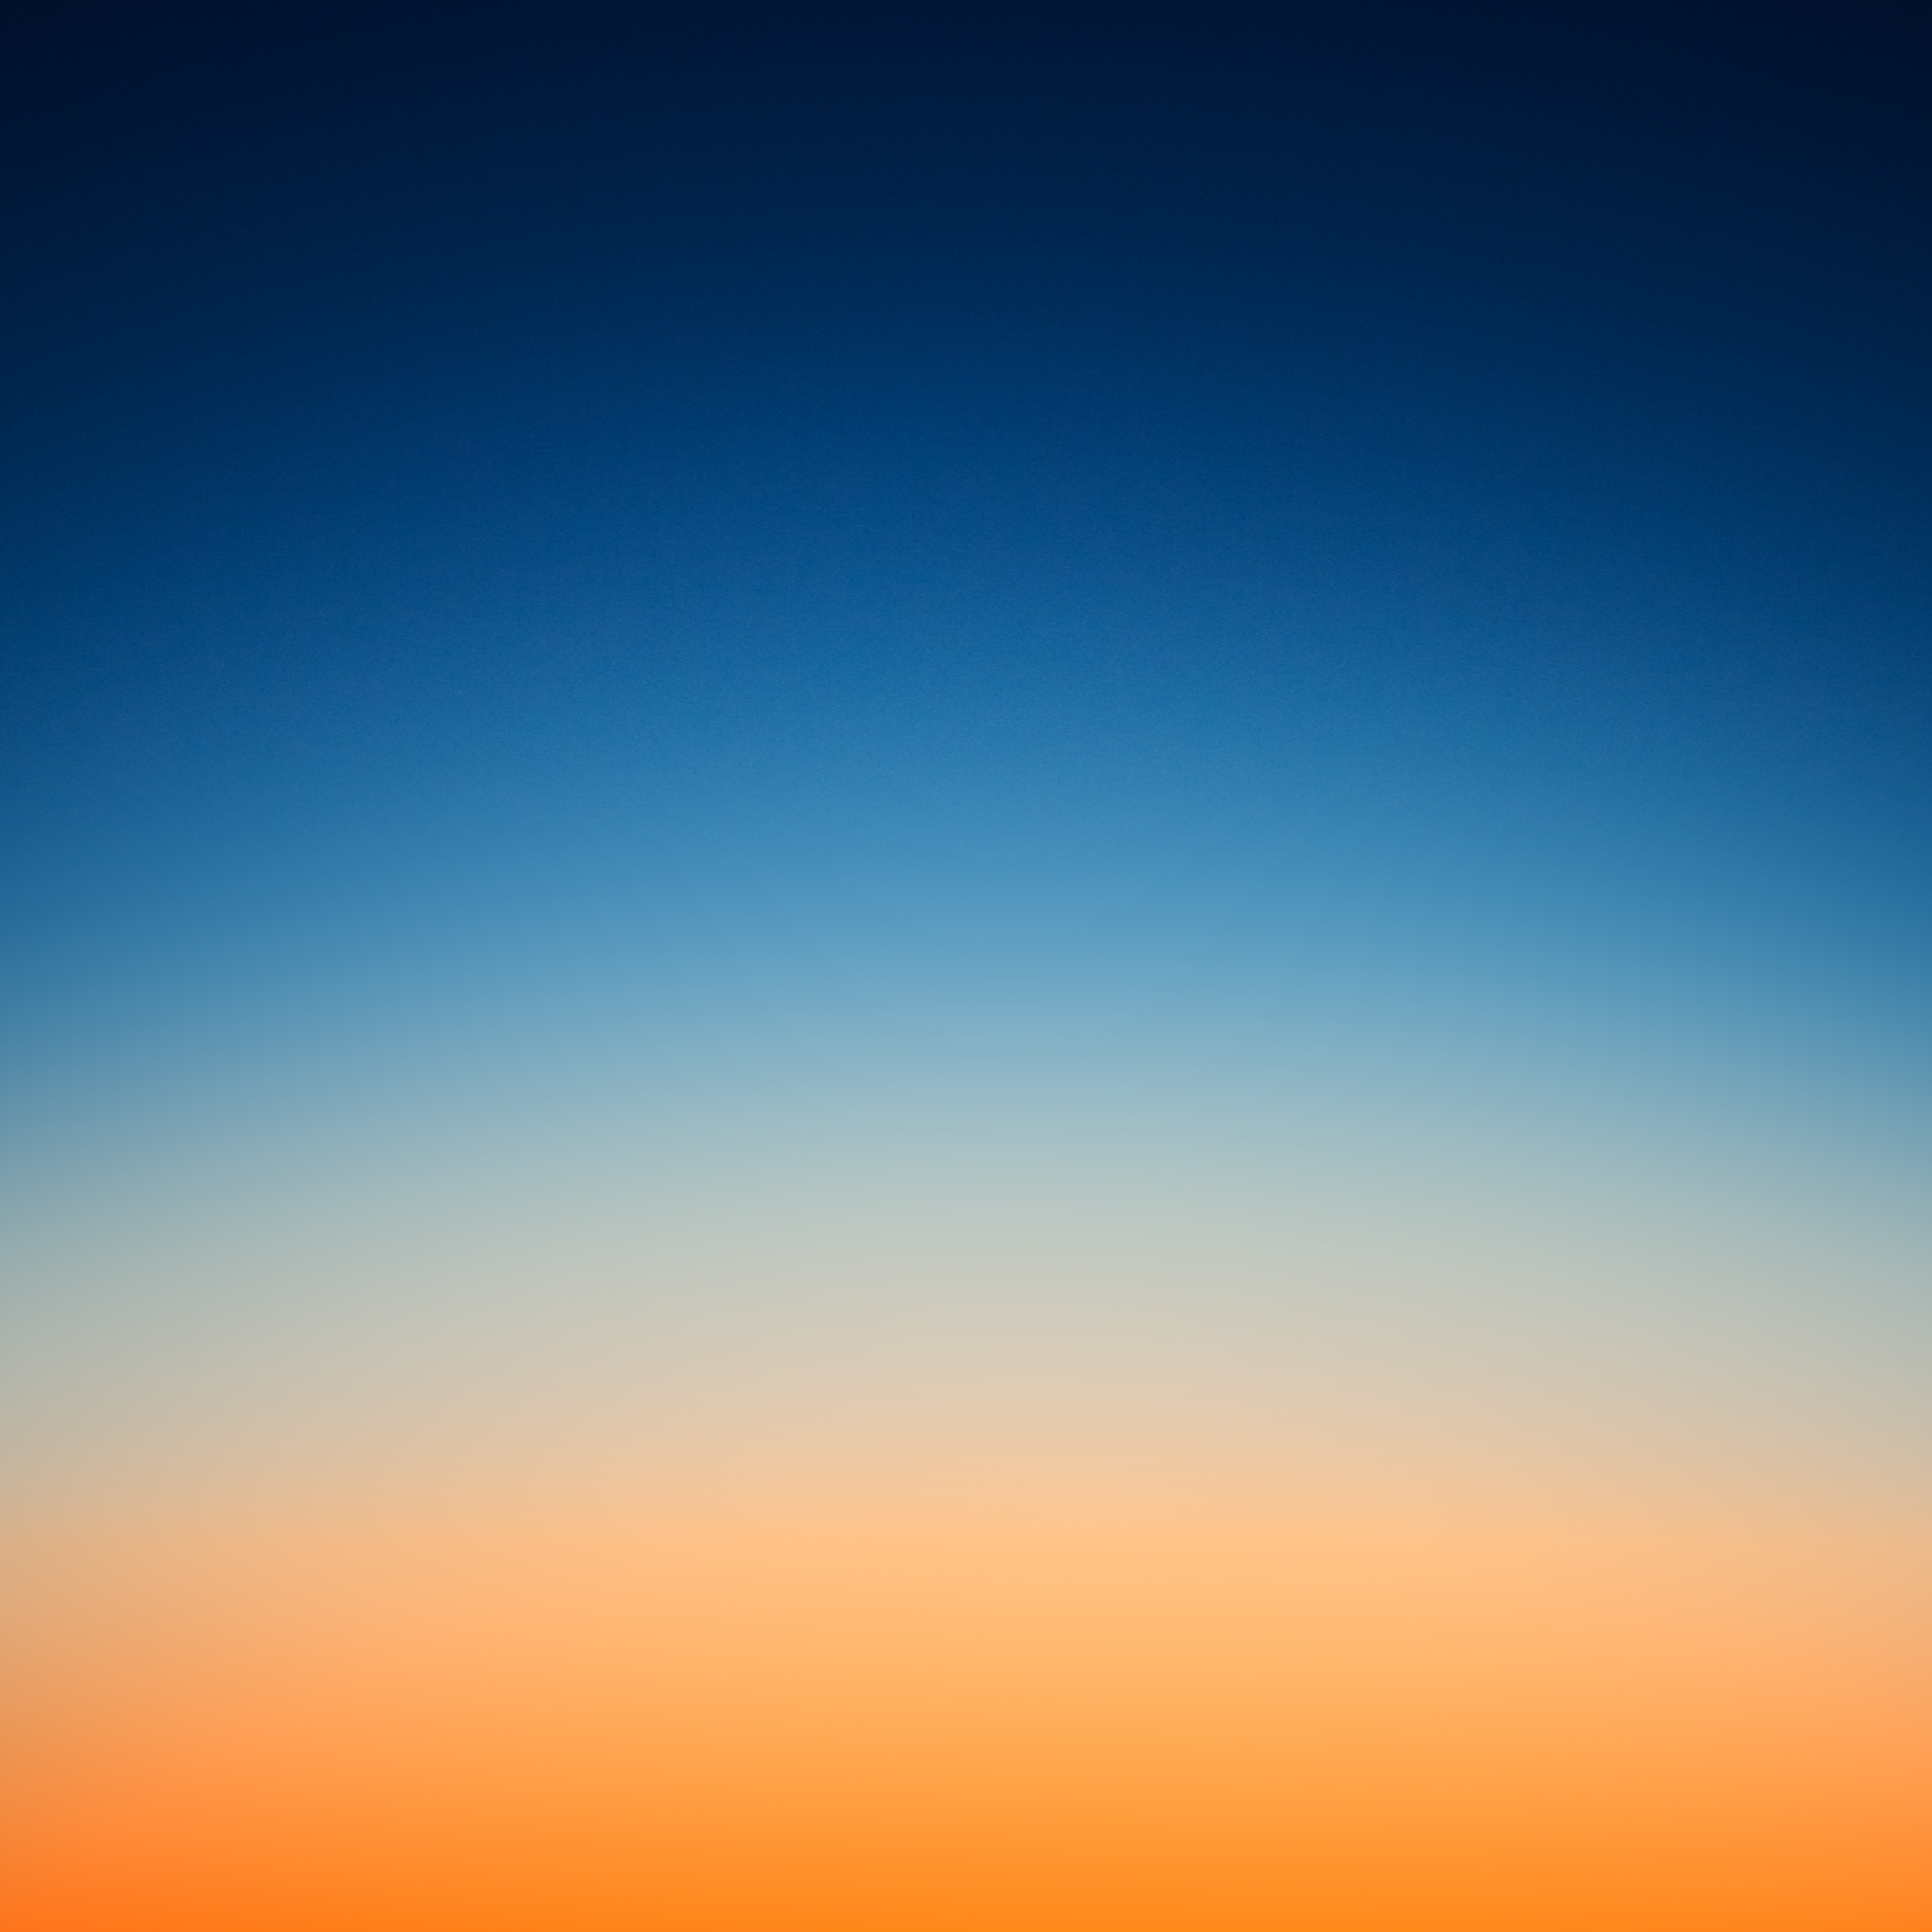 iOS7 wallpapers